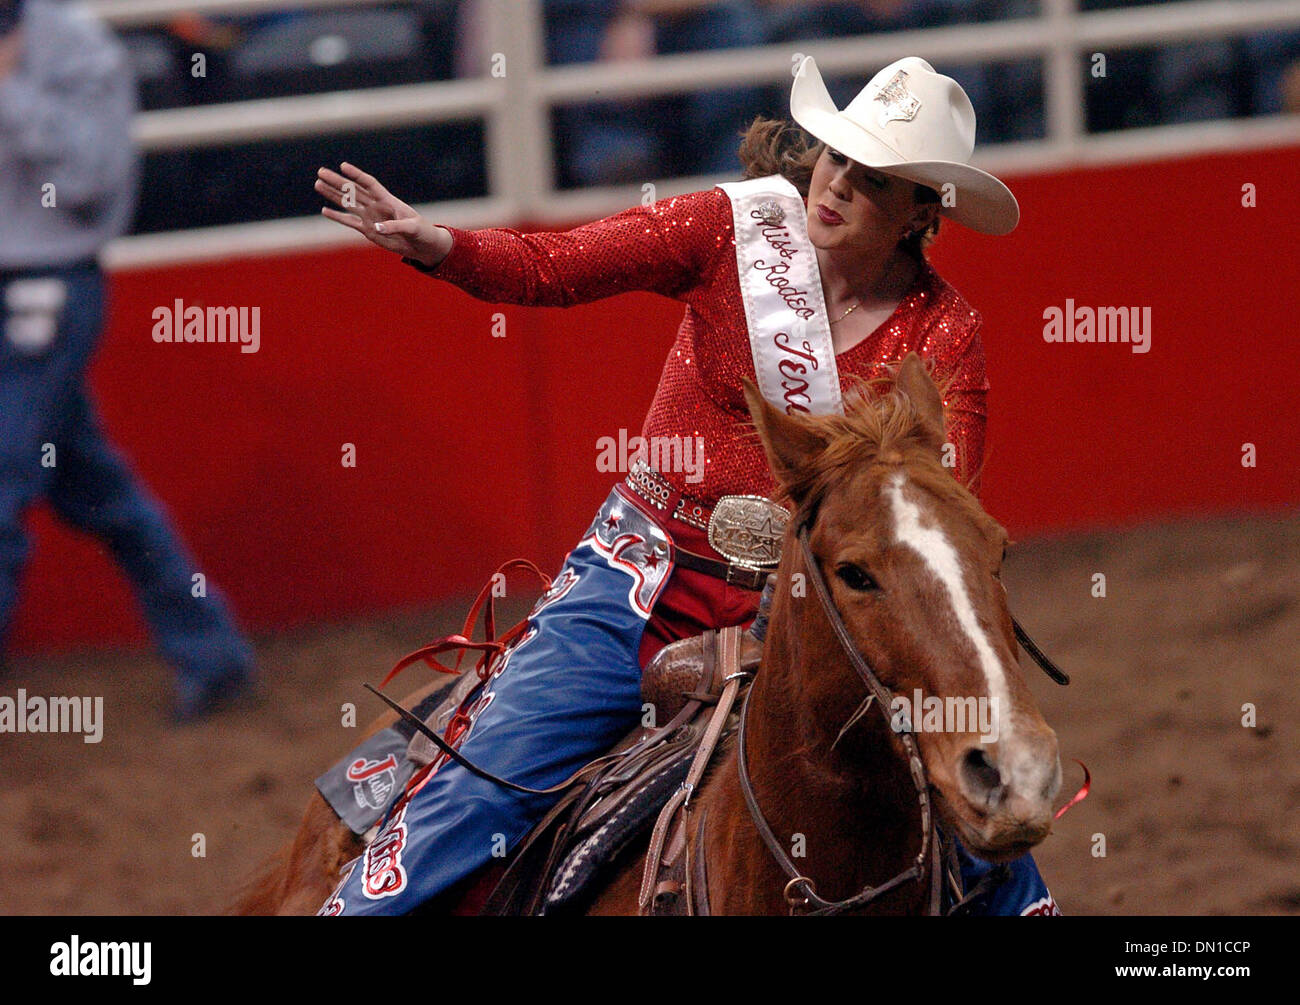 Feb 04, 2006; San Antonio, TX, USA; Miss Rodeo Texas Beth Murphy enters the arena at the San Antonio Stock Show & Rodeo in the AT&T Center on Saturday, Feb. 4, 2006. Mandatory Credit: Photo by Billy Calzada/San Antonio Express-News /ZUMA Press. (©) Copyright 2006 by San Antonio Express-News Stock Photo